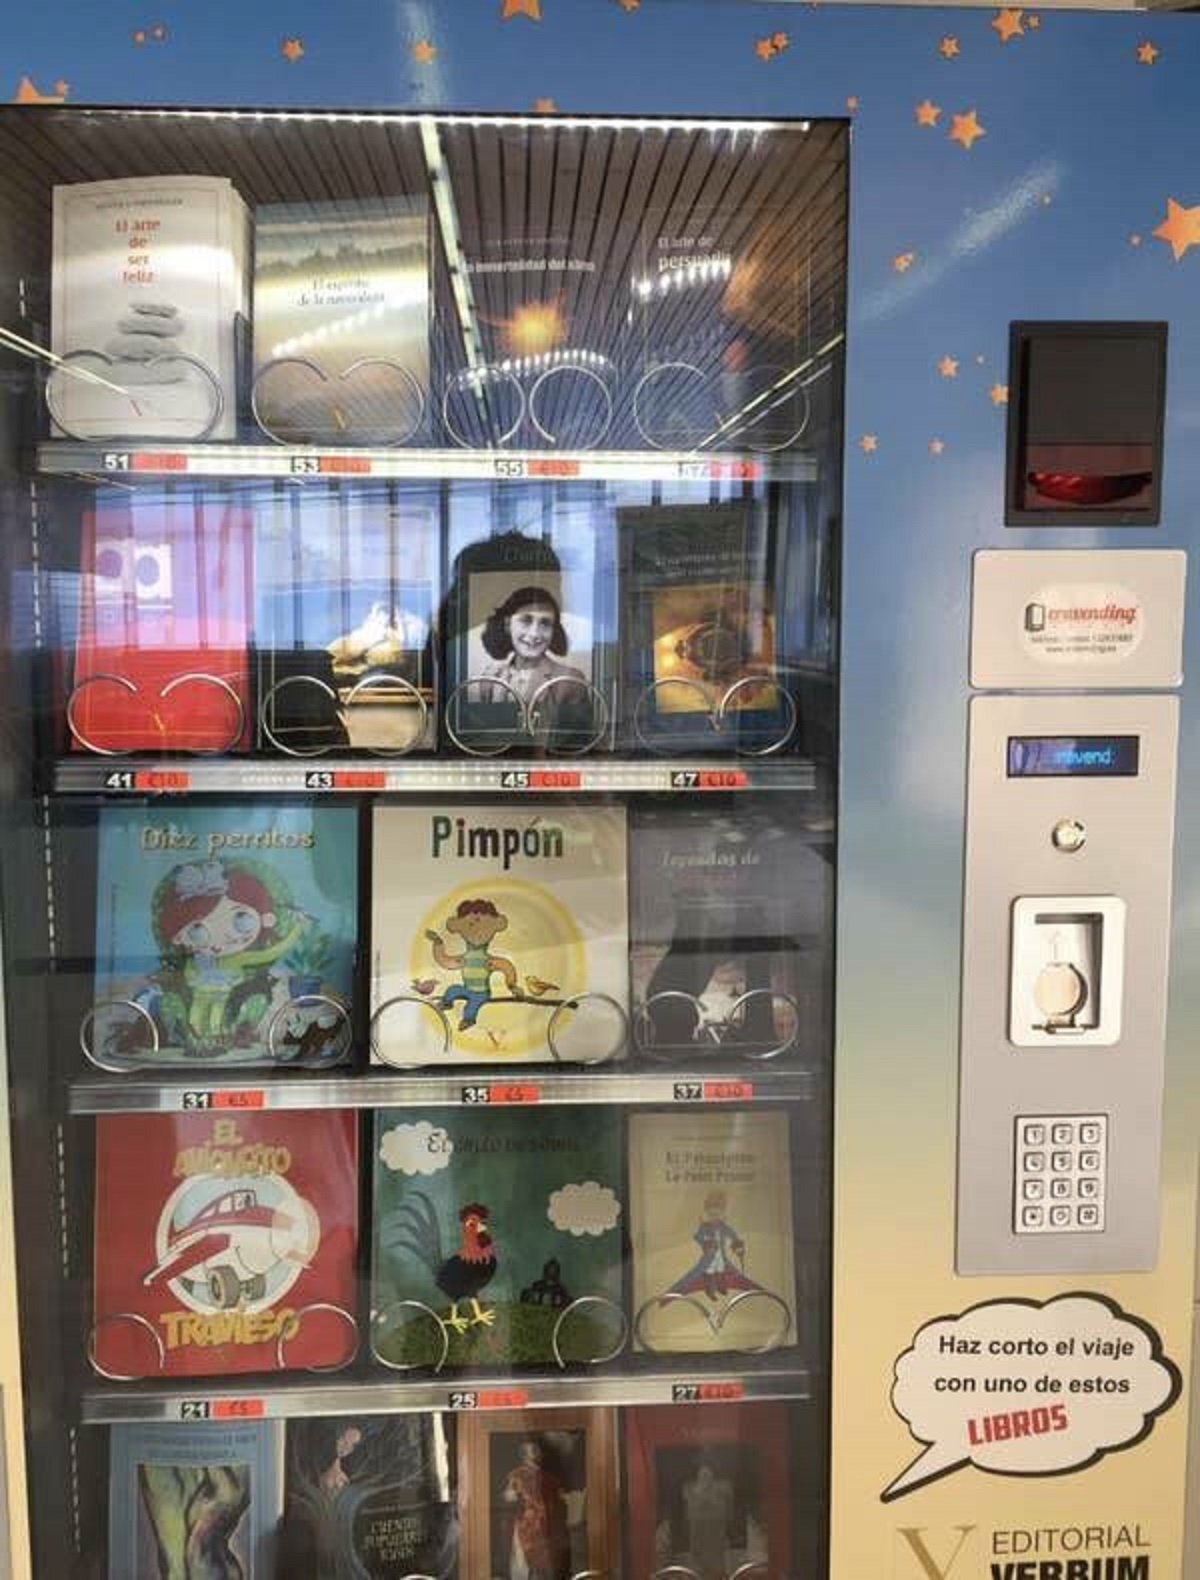 And Spain has a book vending machine, so if you forgot your book and you're on the go, you can quickly grab a new one!